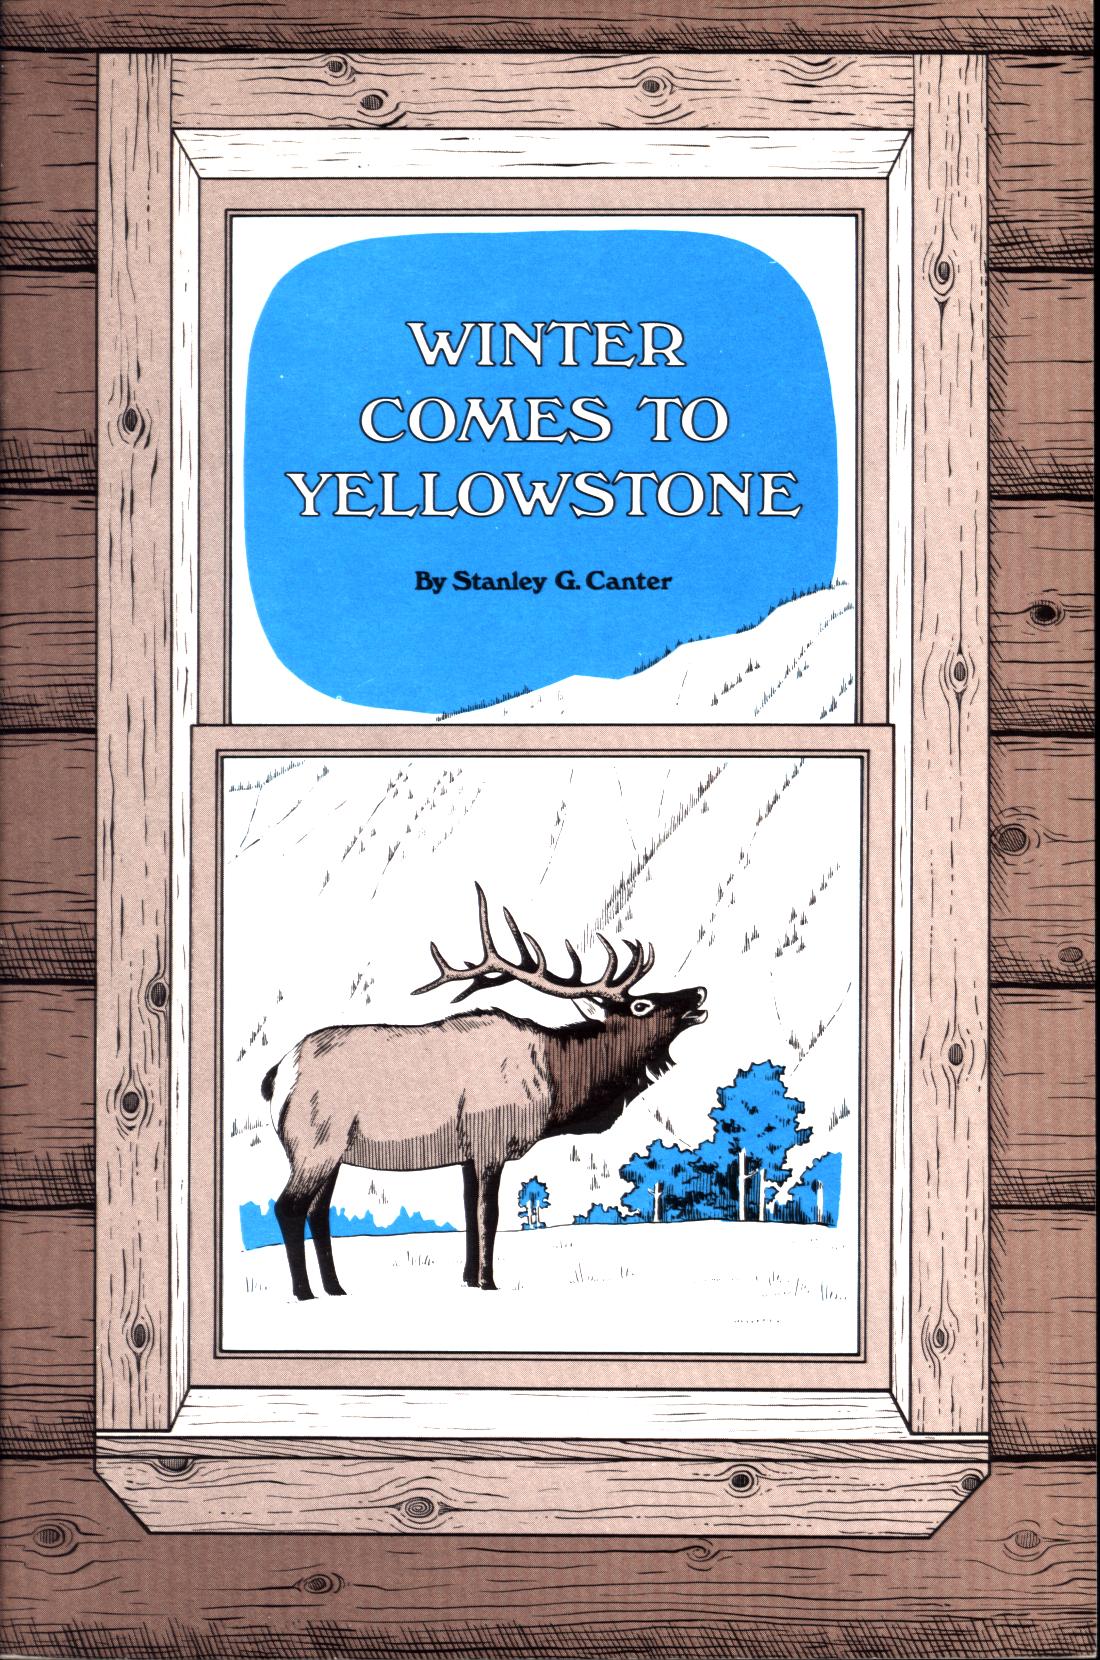 WINTER COMES TO YELLOWSTONE.